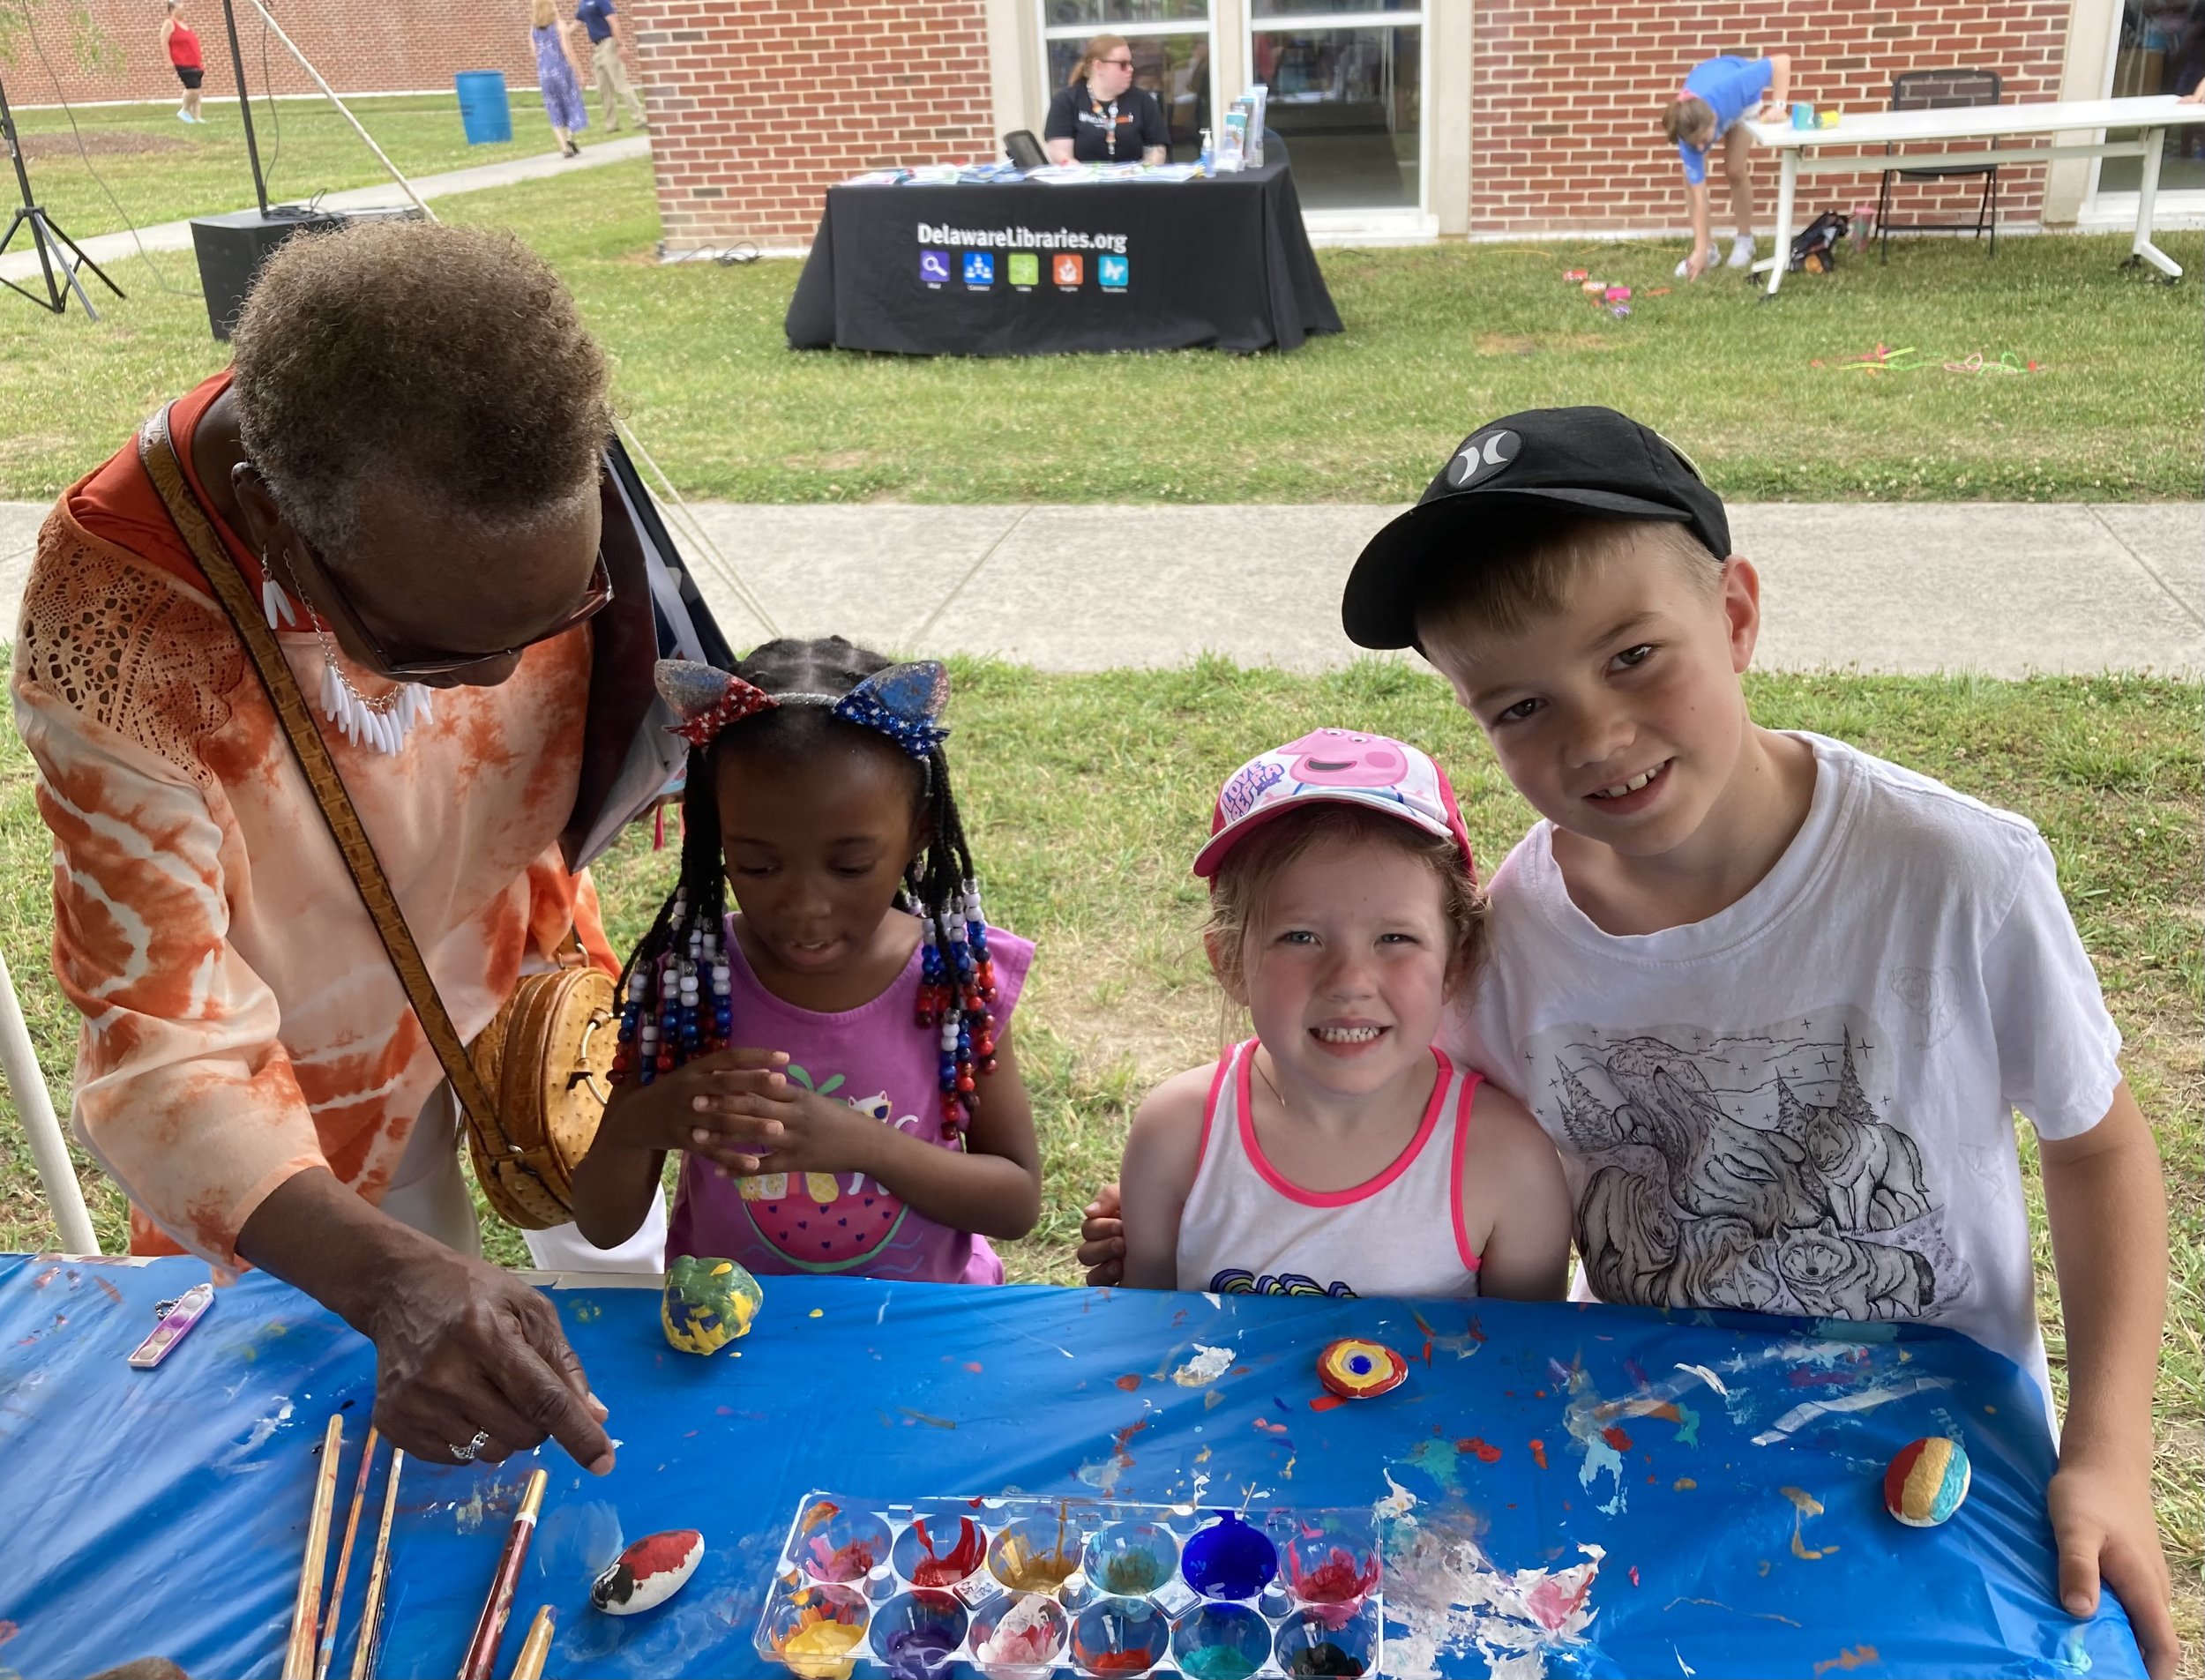 Community members explore peace art and resources for nonviolence at Nonviolent Seaford’s table at the Seaford Public Library’s Summer Reading Program Kick-off